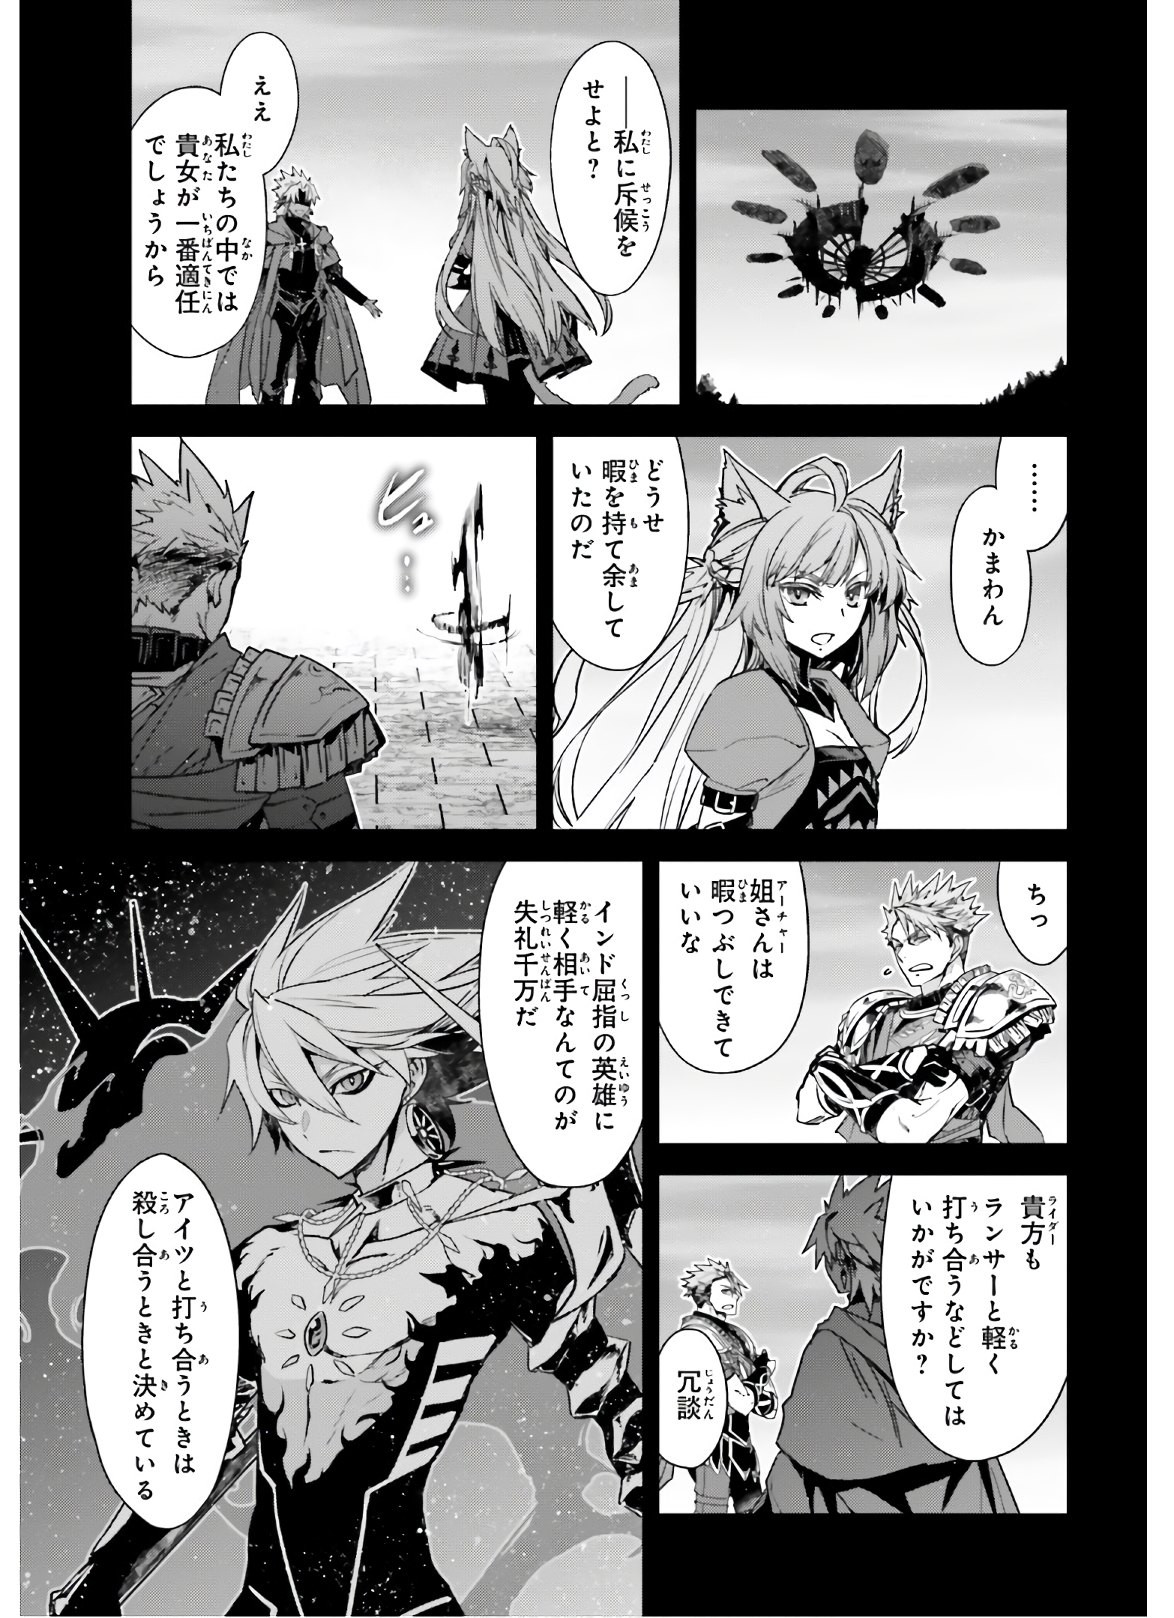 Fate-Apocrypha - Chapter 47 - Page 3